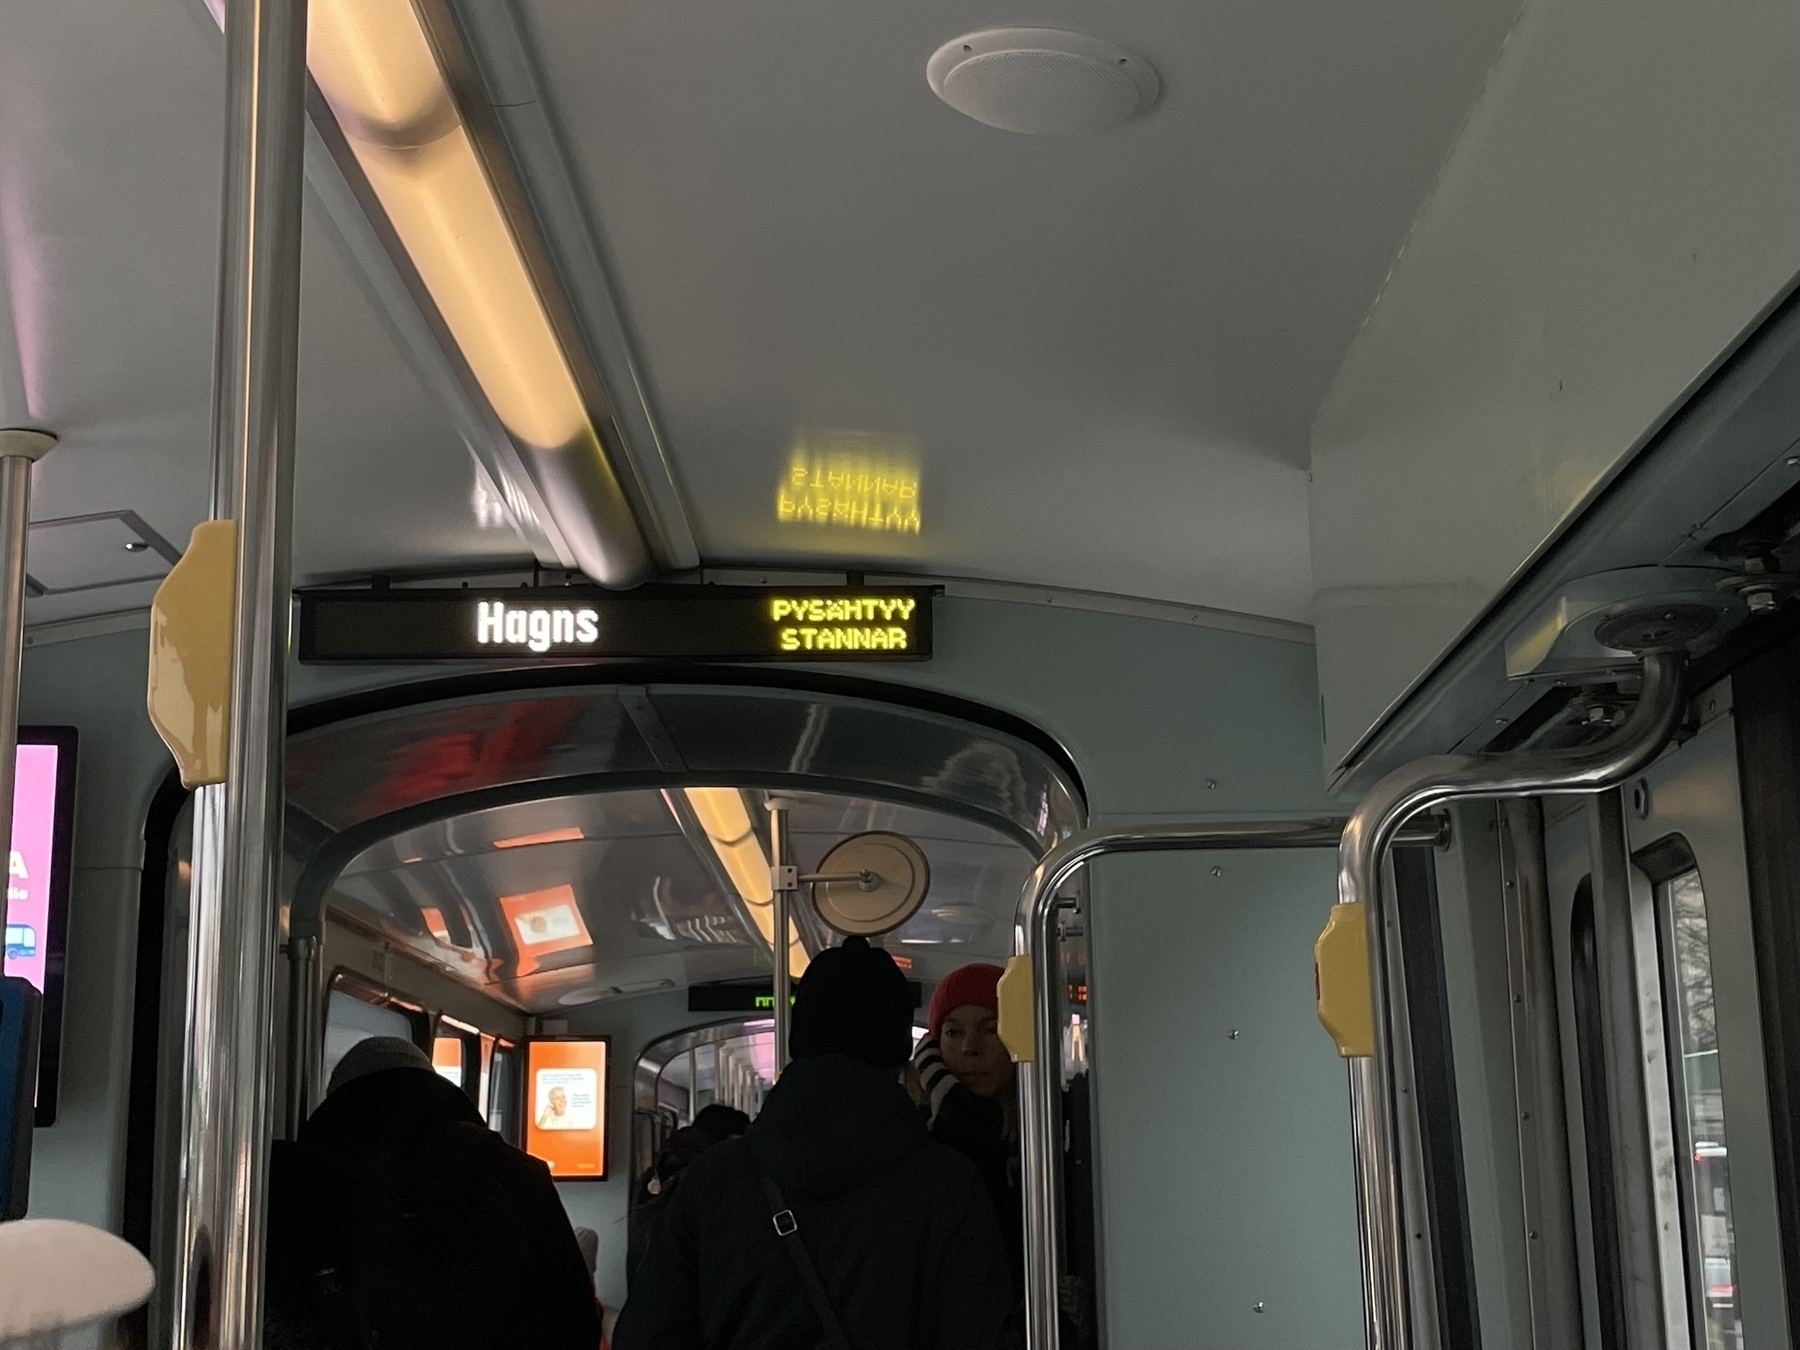 Tram interior with sign saying “Hagns” as well as ”pysähtyy” and ”stannar”. There are some people on the tram. 